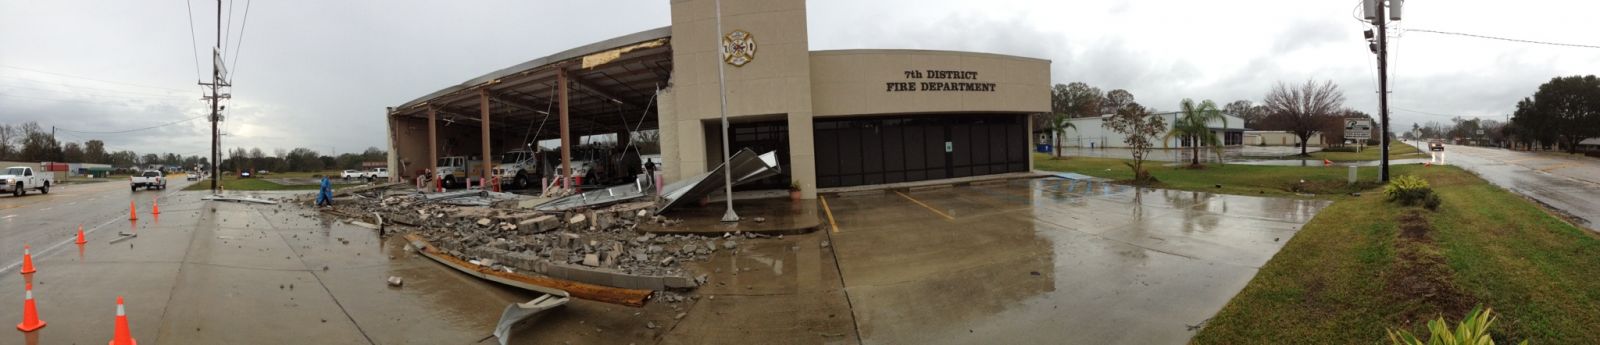 Damage to 7th District Fire Station